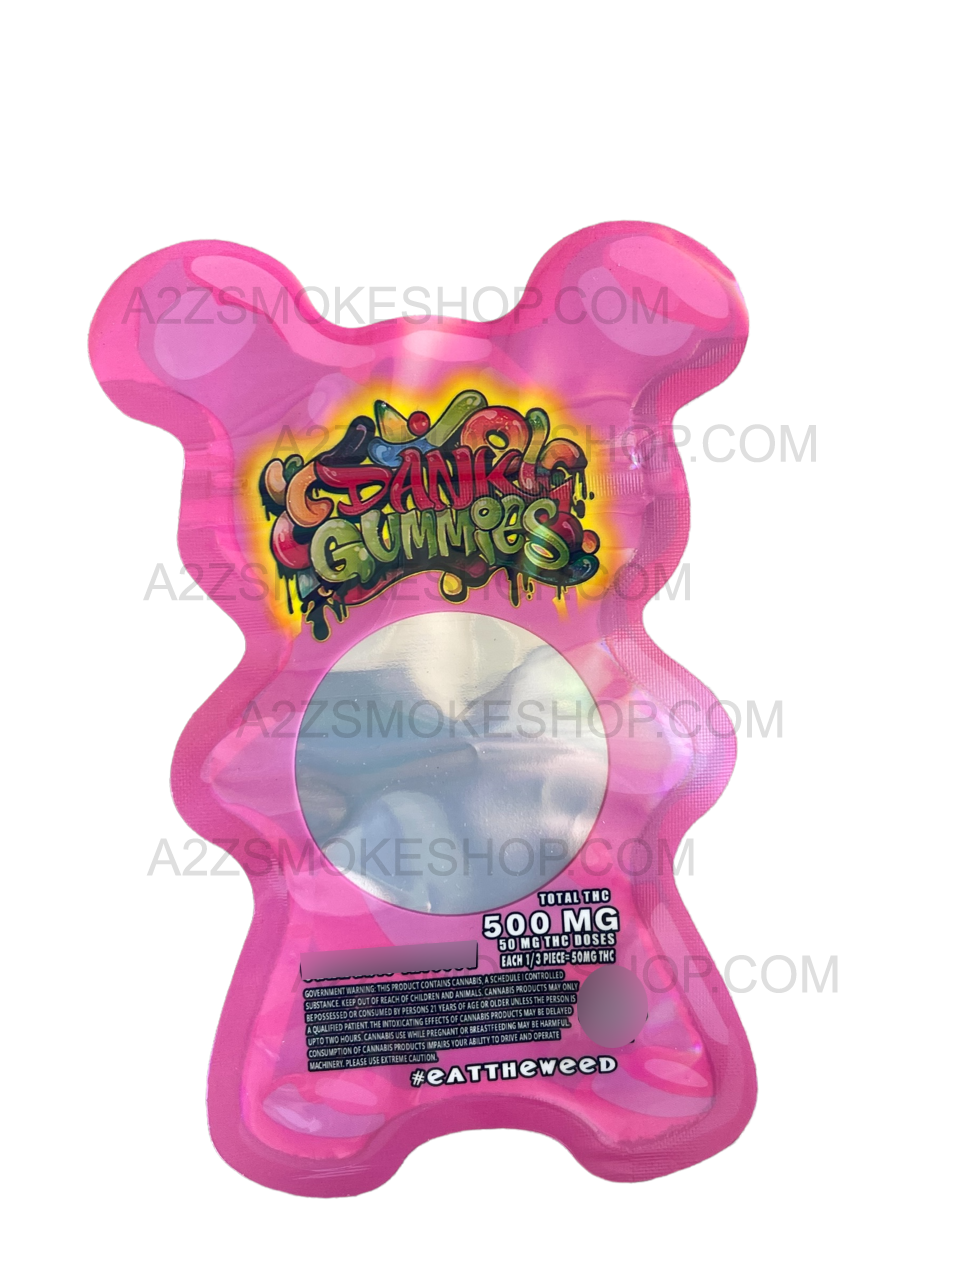 Dank Gummies Cut out 500mg  Mylar Bag with window  Pink- Packaging Only